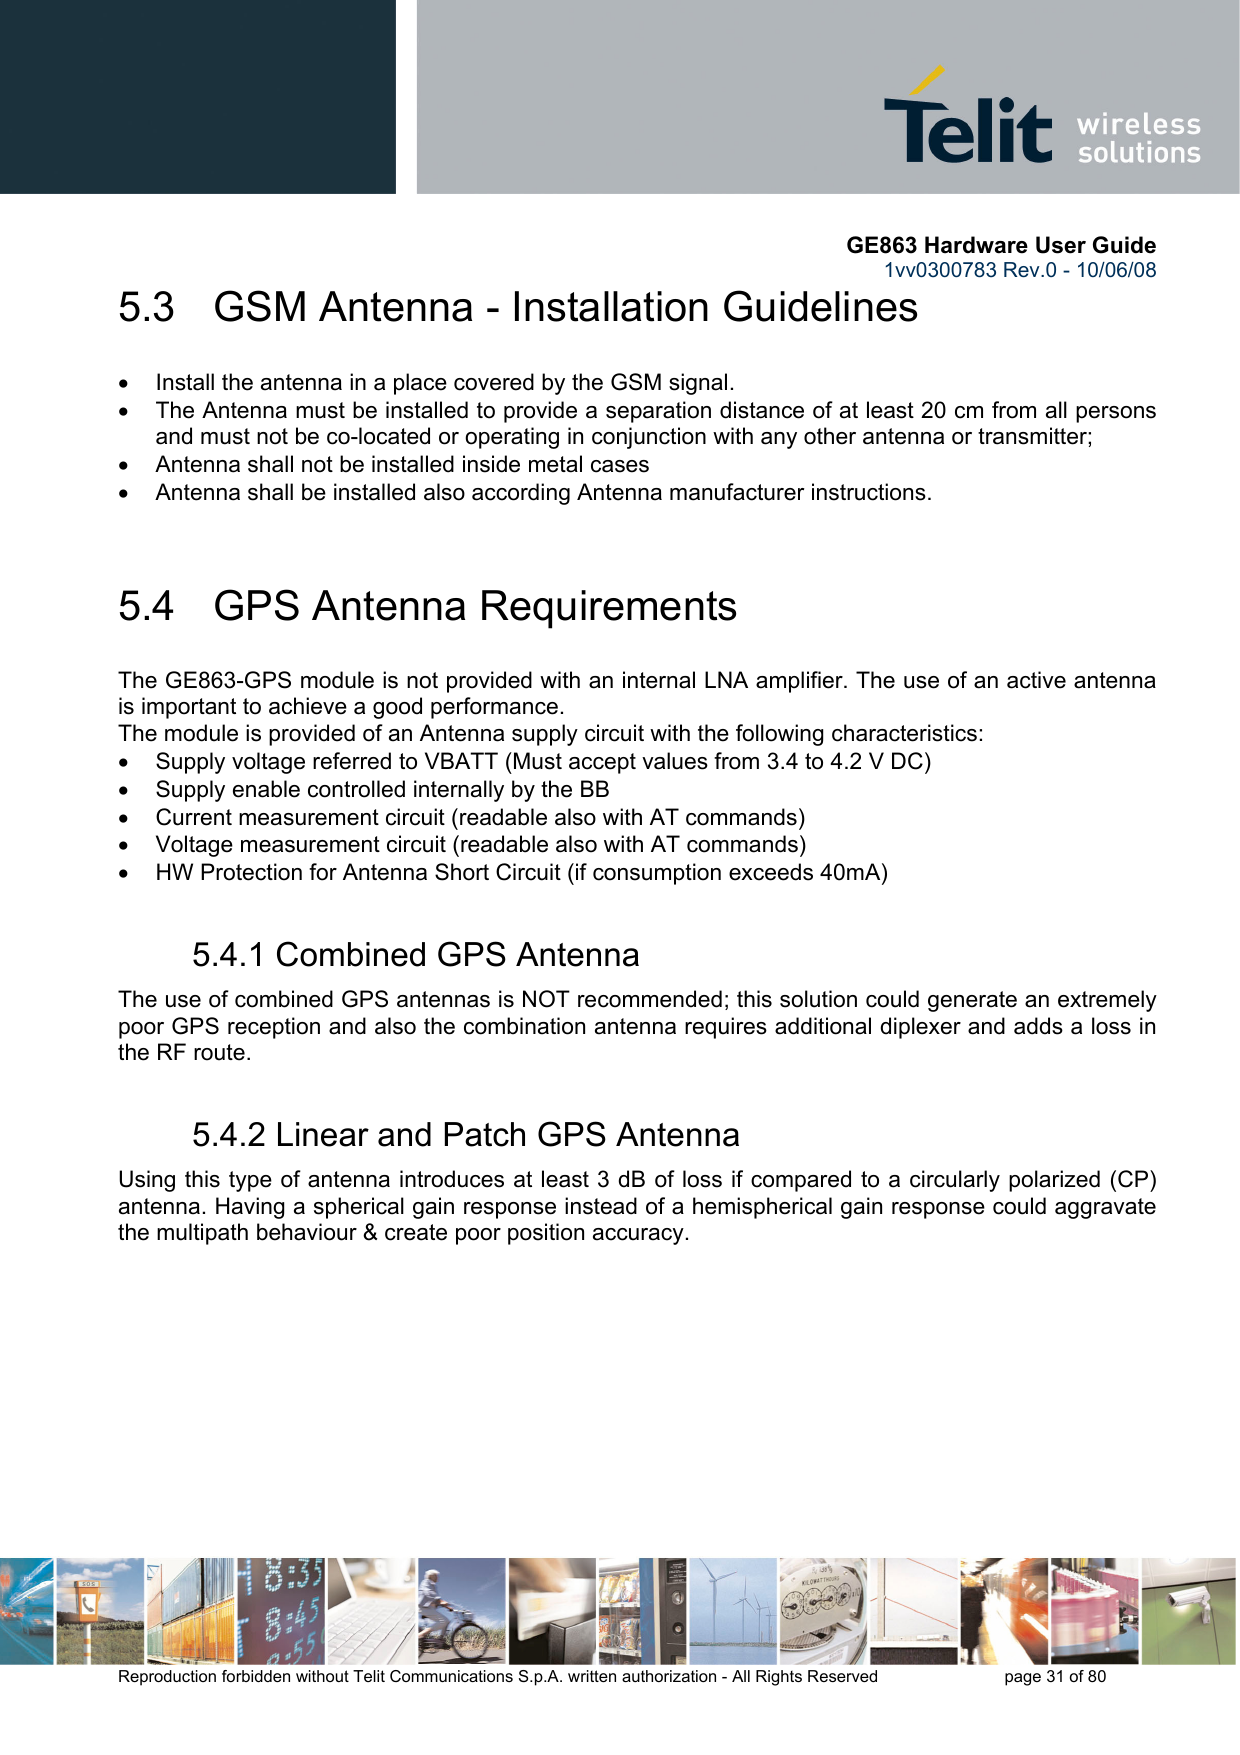       GE863 Hardware User Guide 1vv0300783 Rev.0 - 10/06/08 Reproduction forbidden without Telit Communications S.p.A. written authorization - All Rights Reserved    page 31 of 80  5.3   GSM Antenna - Installation Guidelines •  Install the antenna in a place covered by the GSM signal. •  The Antenna must be installed to provide a separation distance of at least 20 cm from all persons and must not be co-located or operating in conjunction with any other antenna or transmitter; •  Antenna shall not be installed inside metal cases  •  Antenna shall be installed also according Antenna manufacturer instructions.  5.4   GPS Antenna Requirements The GE863-GPS module is not provided with an internal LNA amplifier. The use of an active antenna is important to achieve a good performance. The module is provided of an Antenna supply circuit with the following characteristics: •  Supply voltage referred to VBATT (Must accept values from 3.4 to 4.2 V DC) •  Supply enable controlled internally by the BB •  Current measurement circuit (readable also with AT commands) •  Voltage measurement circuit (readable also with AT commands) •  HW Protection for Antenna Short Circuit (if consumption exceeds 40mA) 5.4.1 Combined GPS Antenna  The use of combined GPS antennas is NOT recommended; this solution could generate an extremely poor GPS reception and also the combination antenna requires additional diplexer and adds a loss in the RF route. 5.4.2 Linear and Patch GPS Antenna Using this type of antenna introduces at least 3 dB of loss if compared to a circularly polarized (CP) antenna. Having a spherical gain response instead of a hemispherical gain response could aggravate the multipath behaviour &amp; create poor position accuracy.  